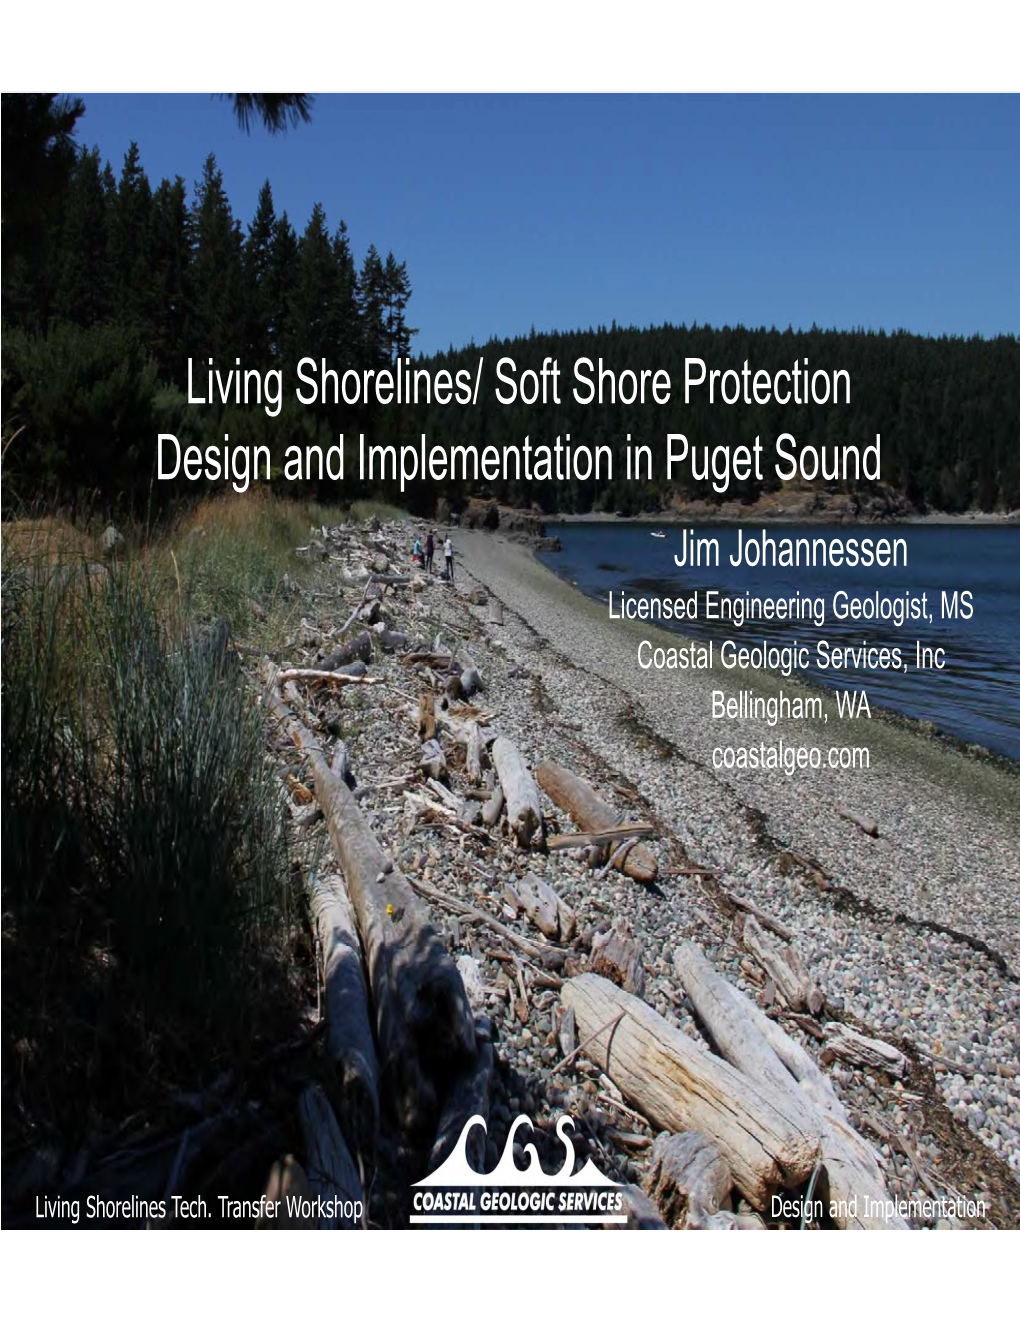 Living Shorelines/ Soft Shore Protection Design And